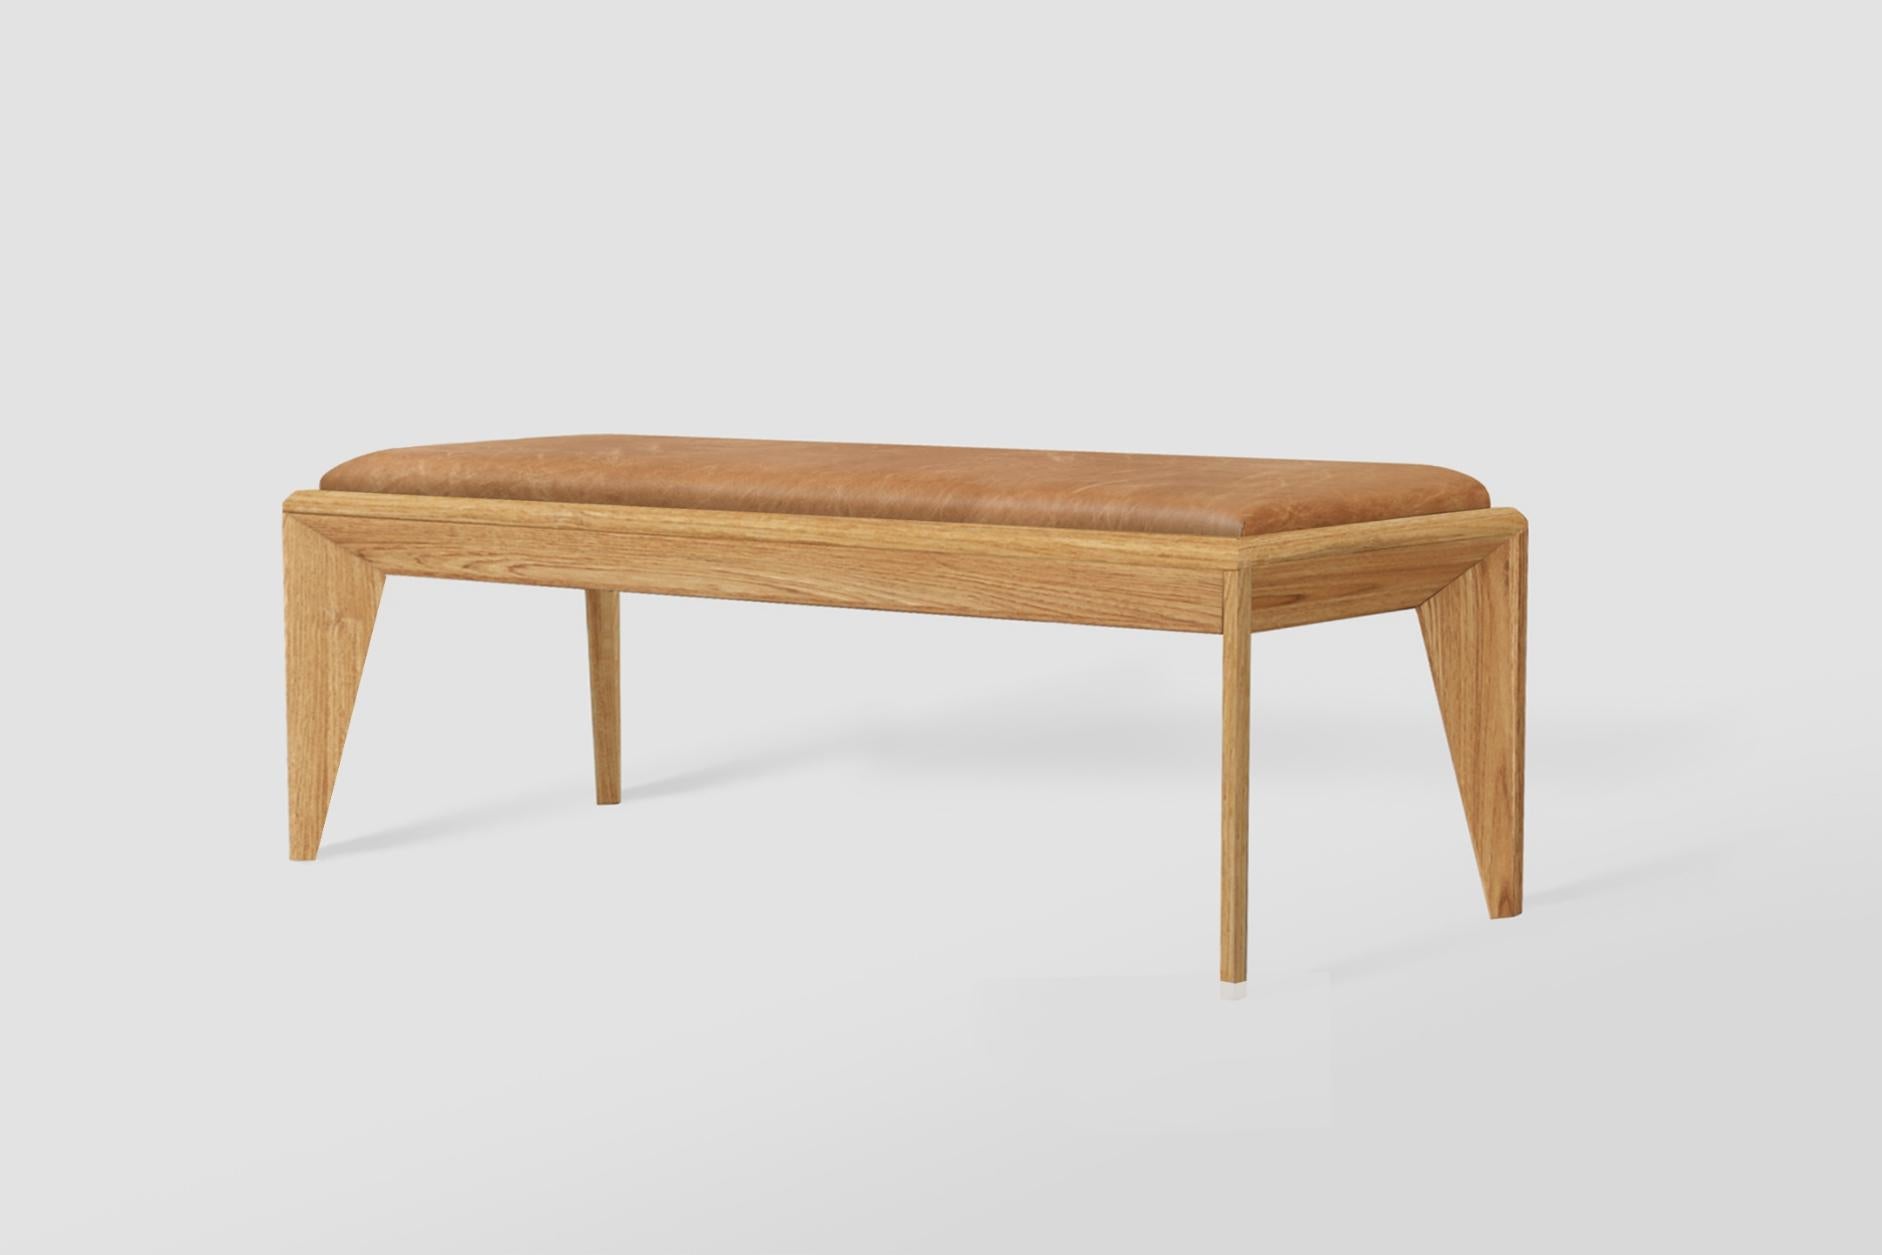 Brazilian Volpi bench in natural wood and fabric seat For Sale